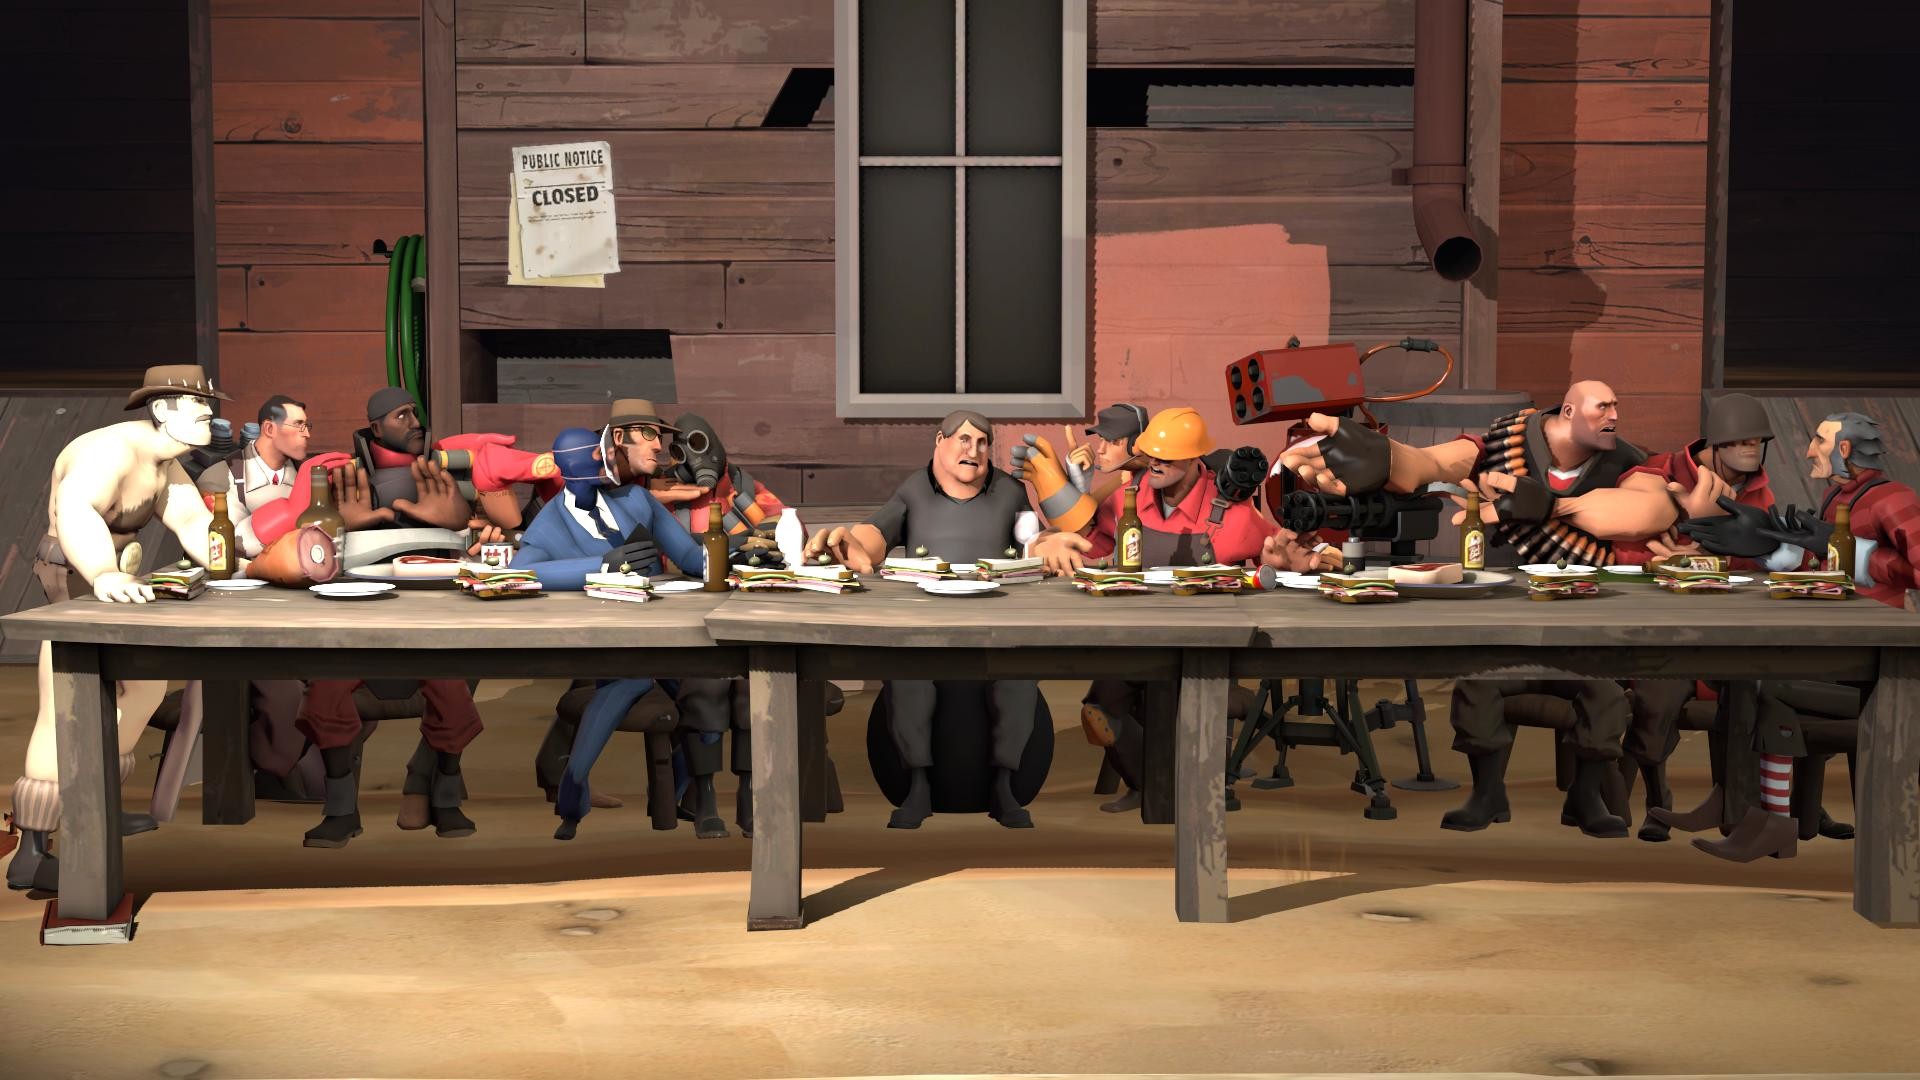 1920x1080 I have a better TF2 version